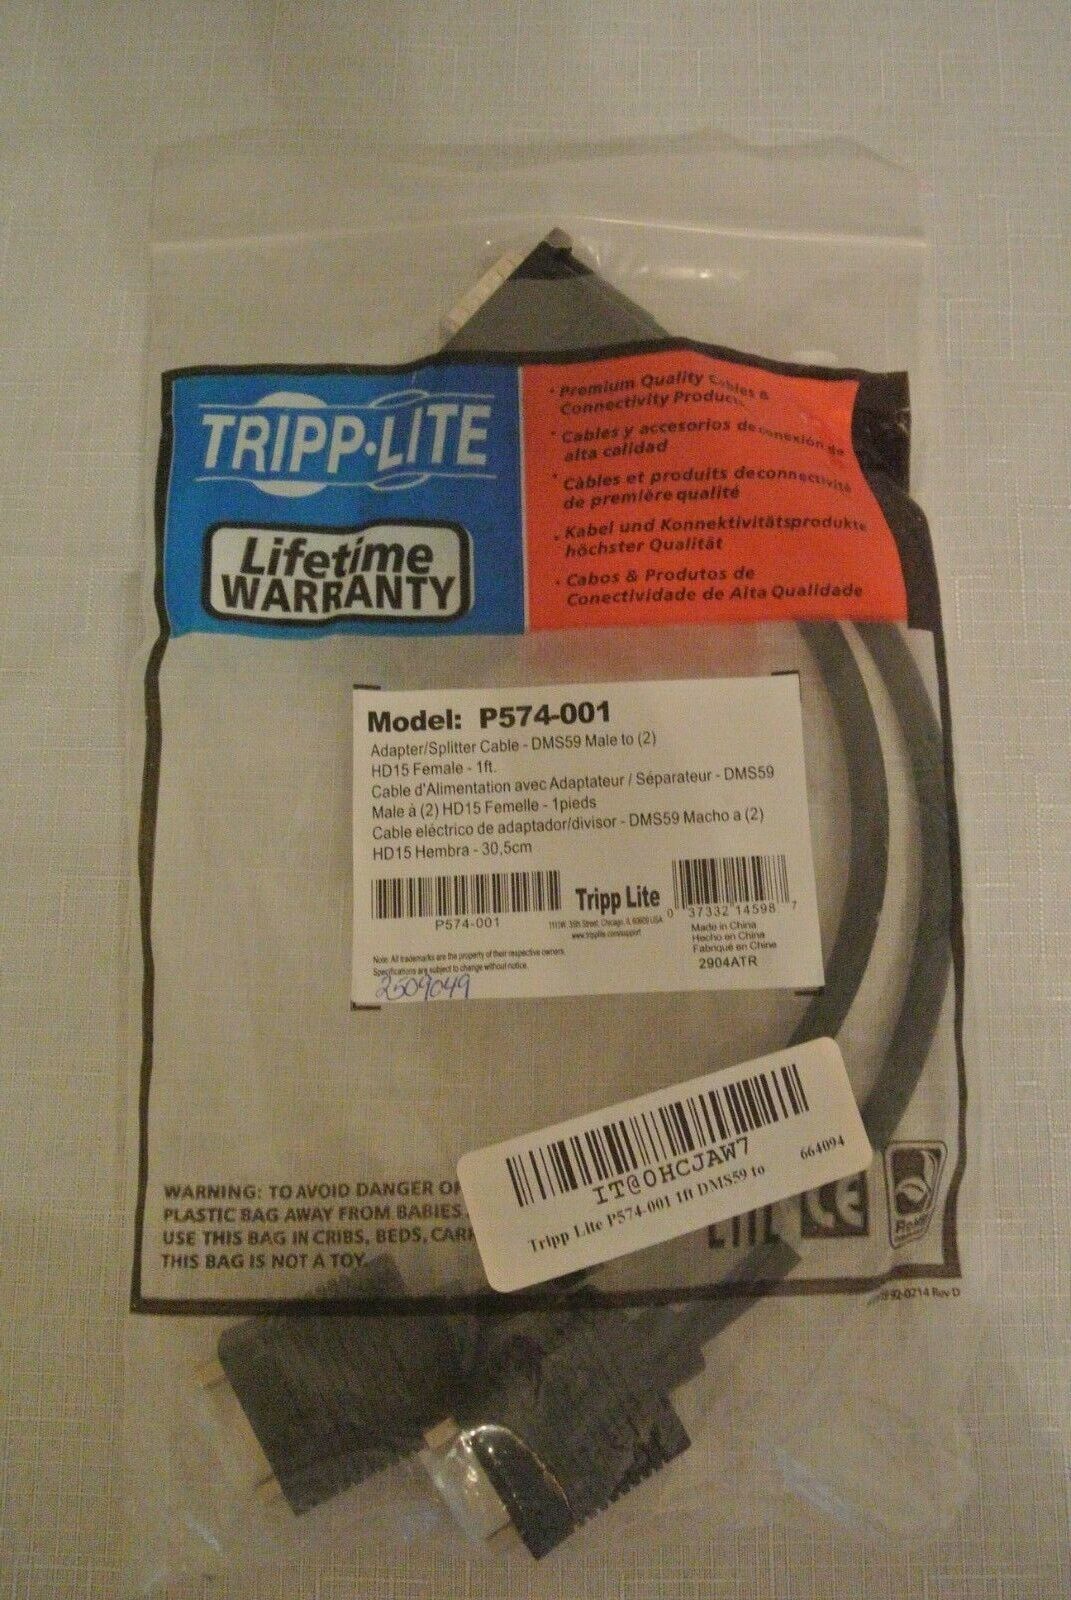 *New* Tripp Lite P574-001/ 1' Dual VGA Y-Splitter Cable-DMS59/Male to (2) Female